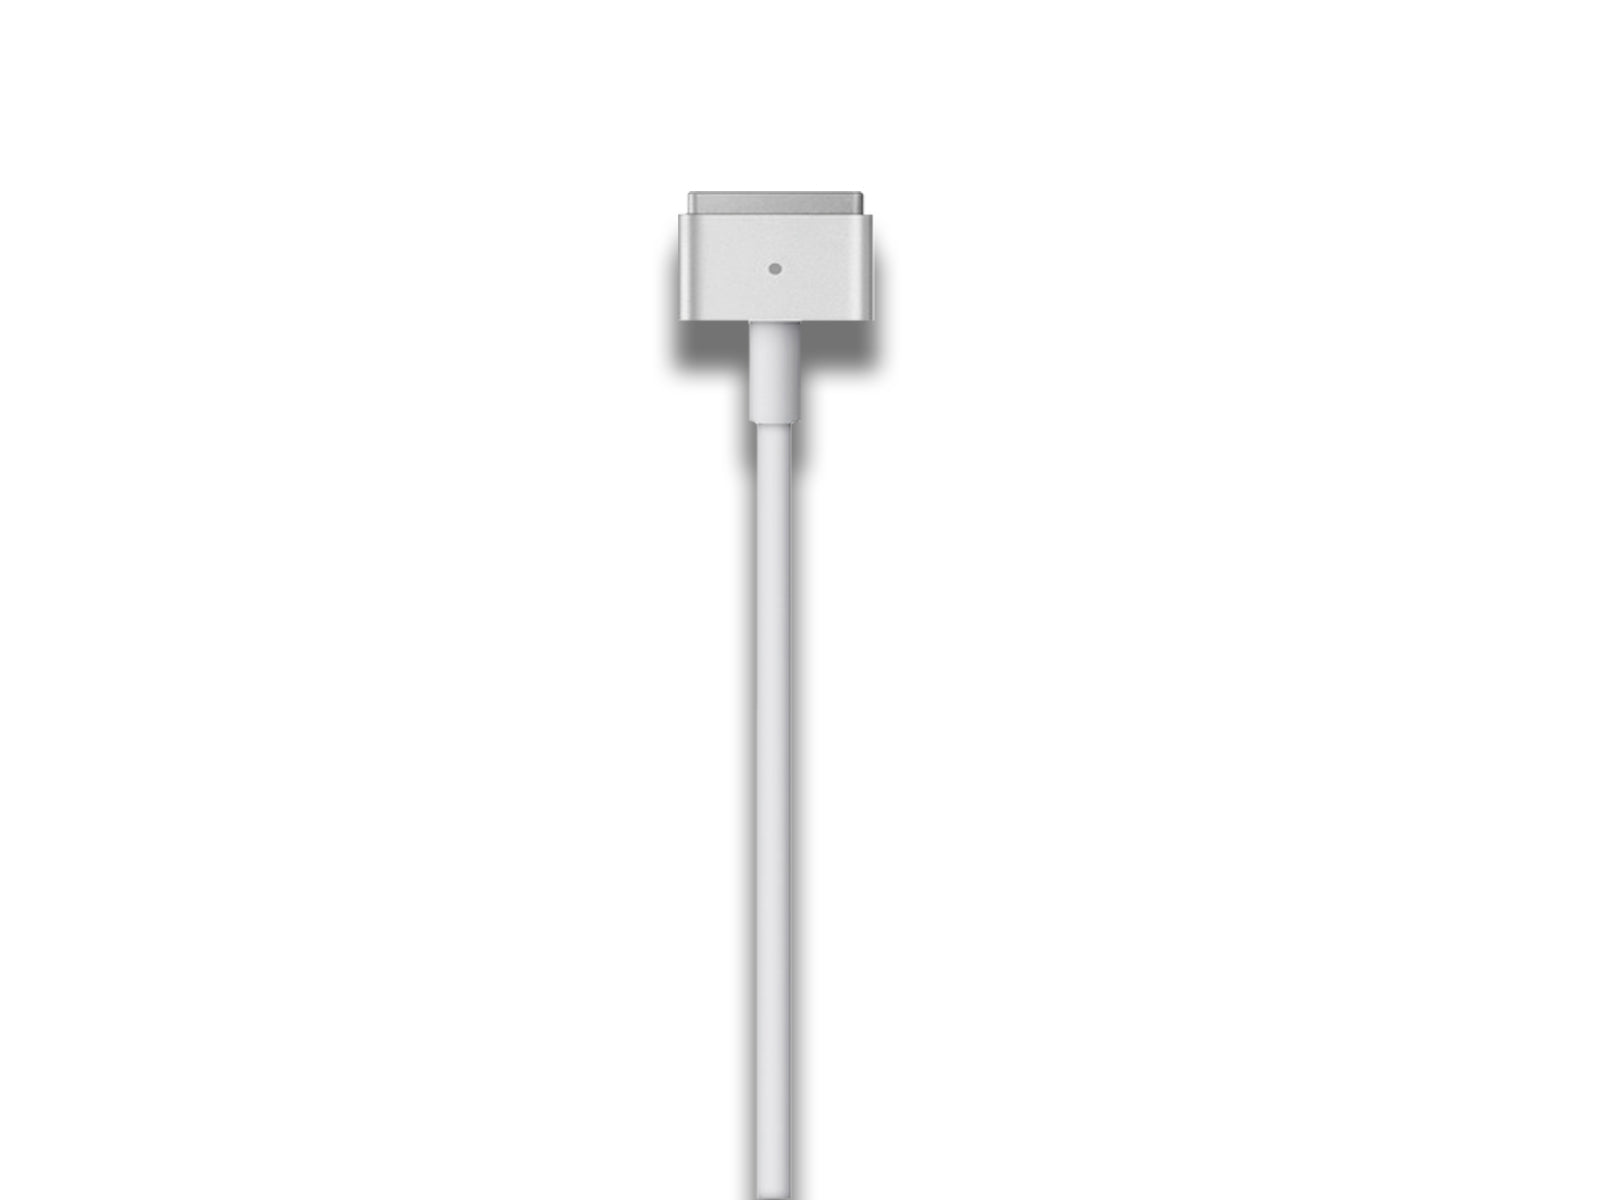 Image-of-the-cables-plug-on-the-white-background